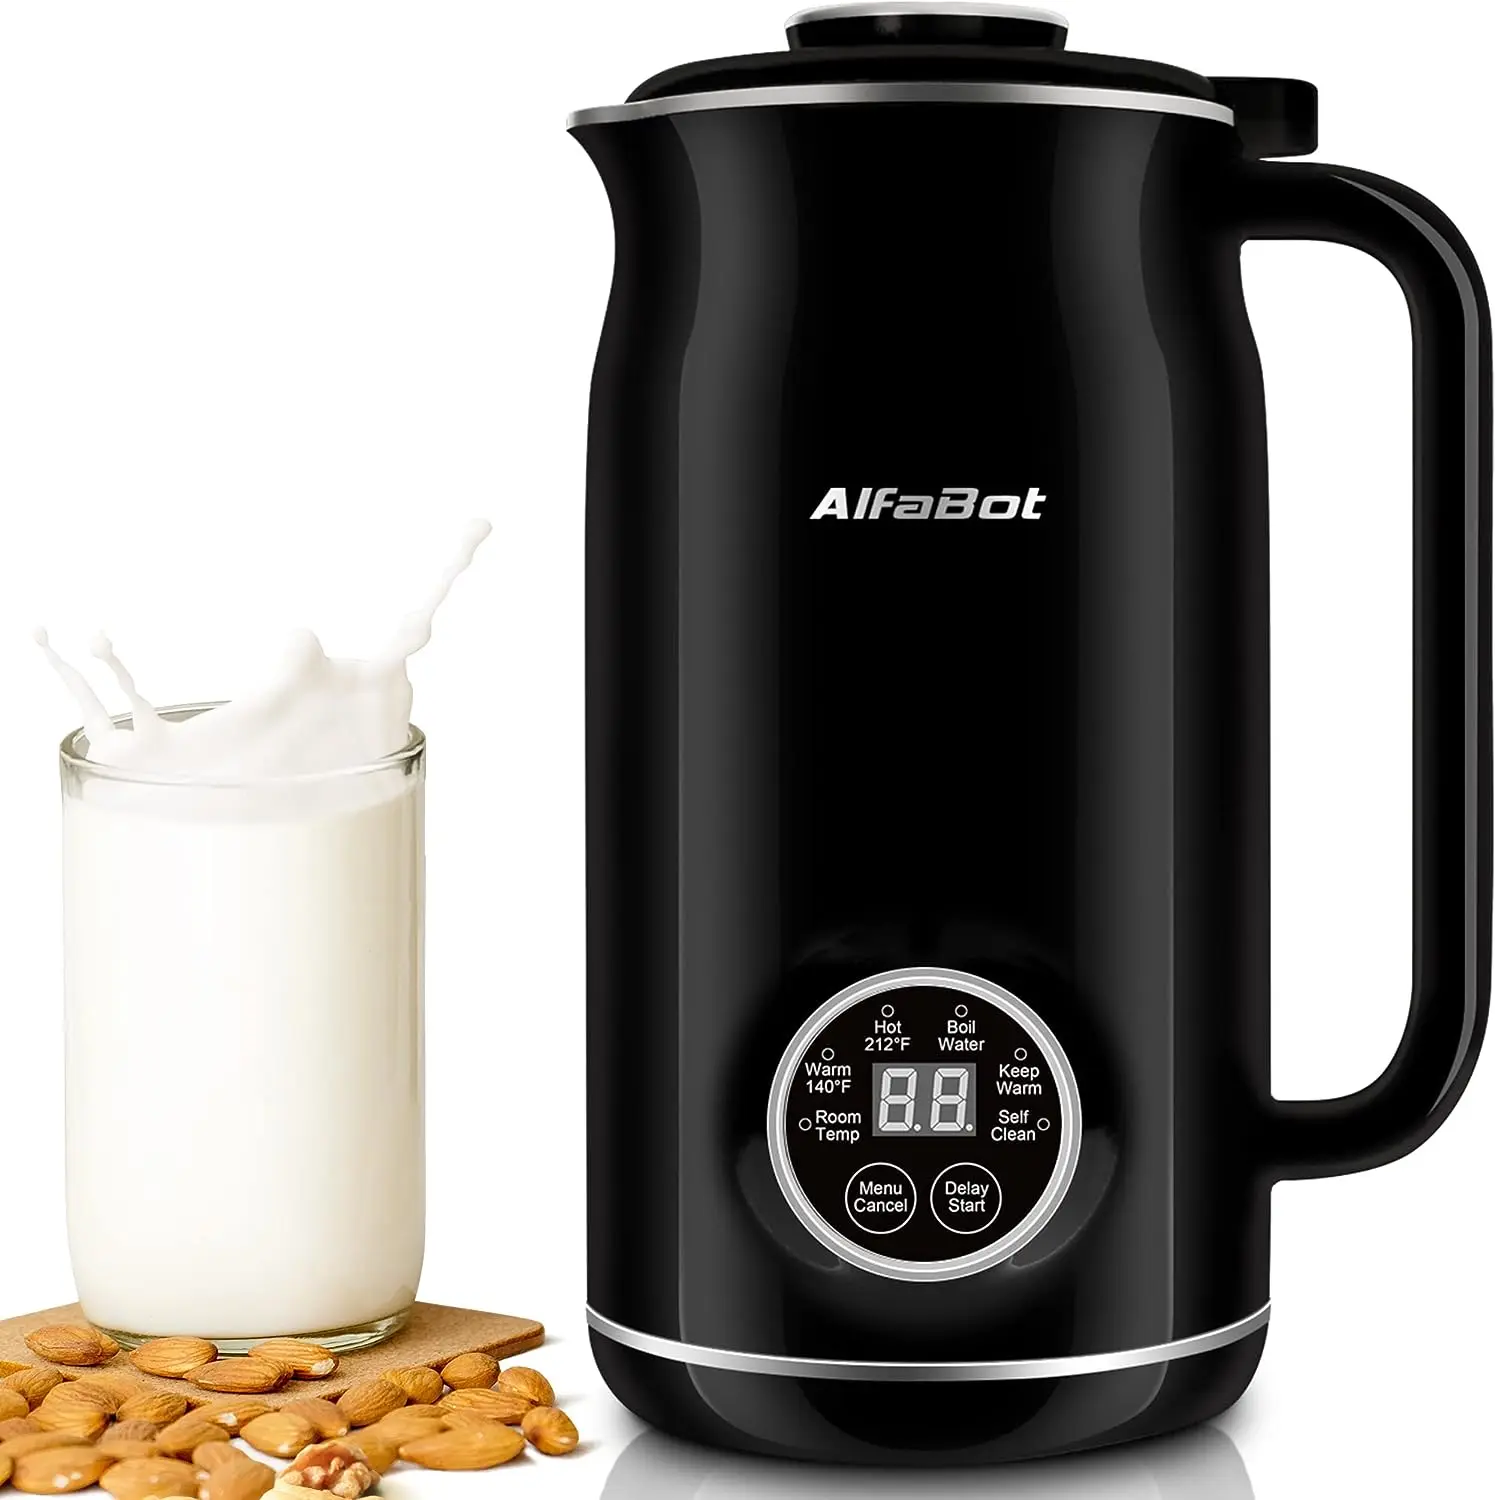 

Milk Maker, Automatic Almond Milk Machine for Homemade Plant-Based Milk, Oat, Soy, Almond Cow and Dairy Free Beverages, 20 oz So